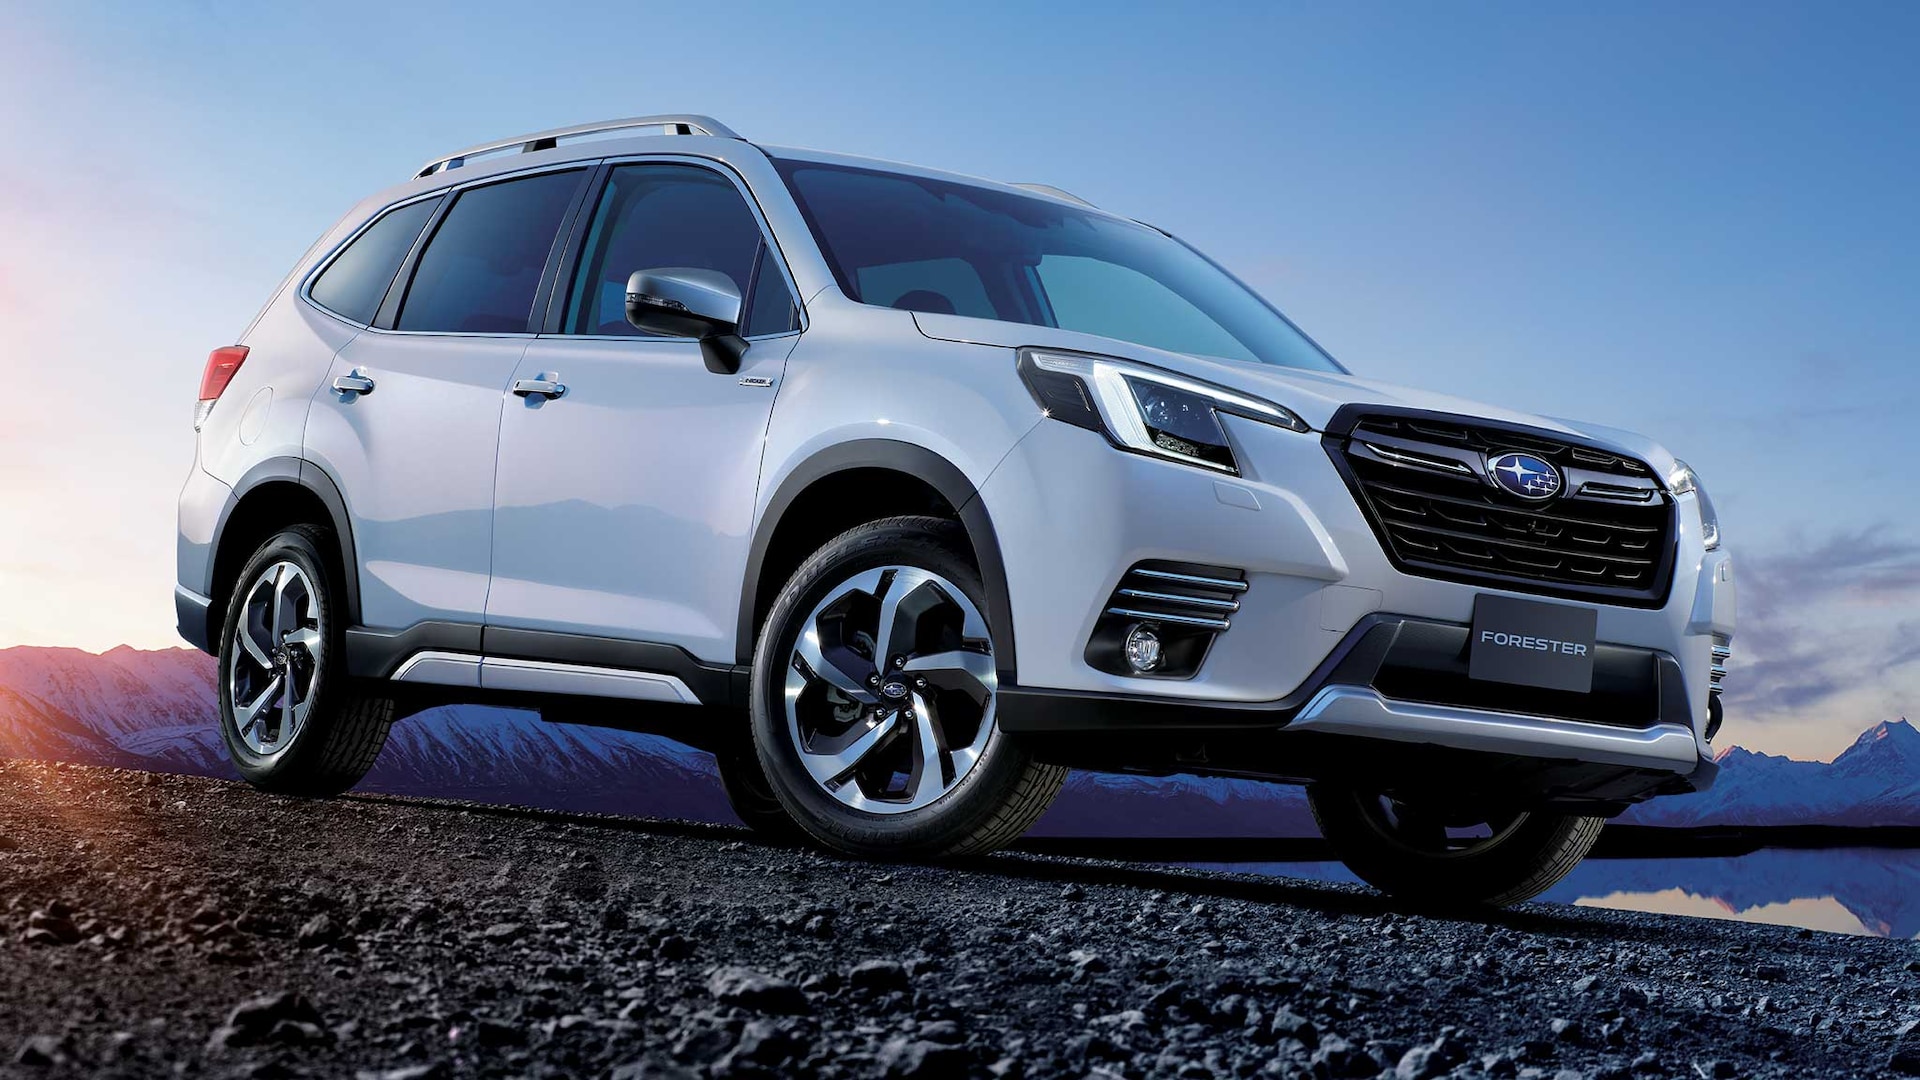 2022 Subaru Forester Gets Sharper Styling, Likely Wilderness Trim